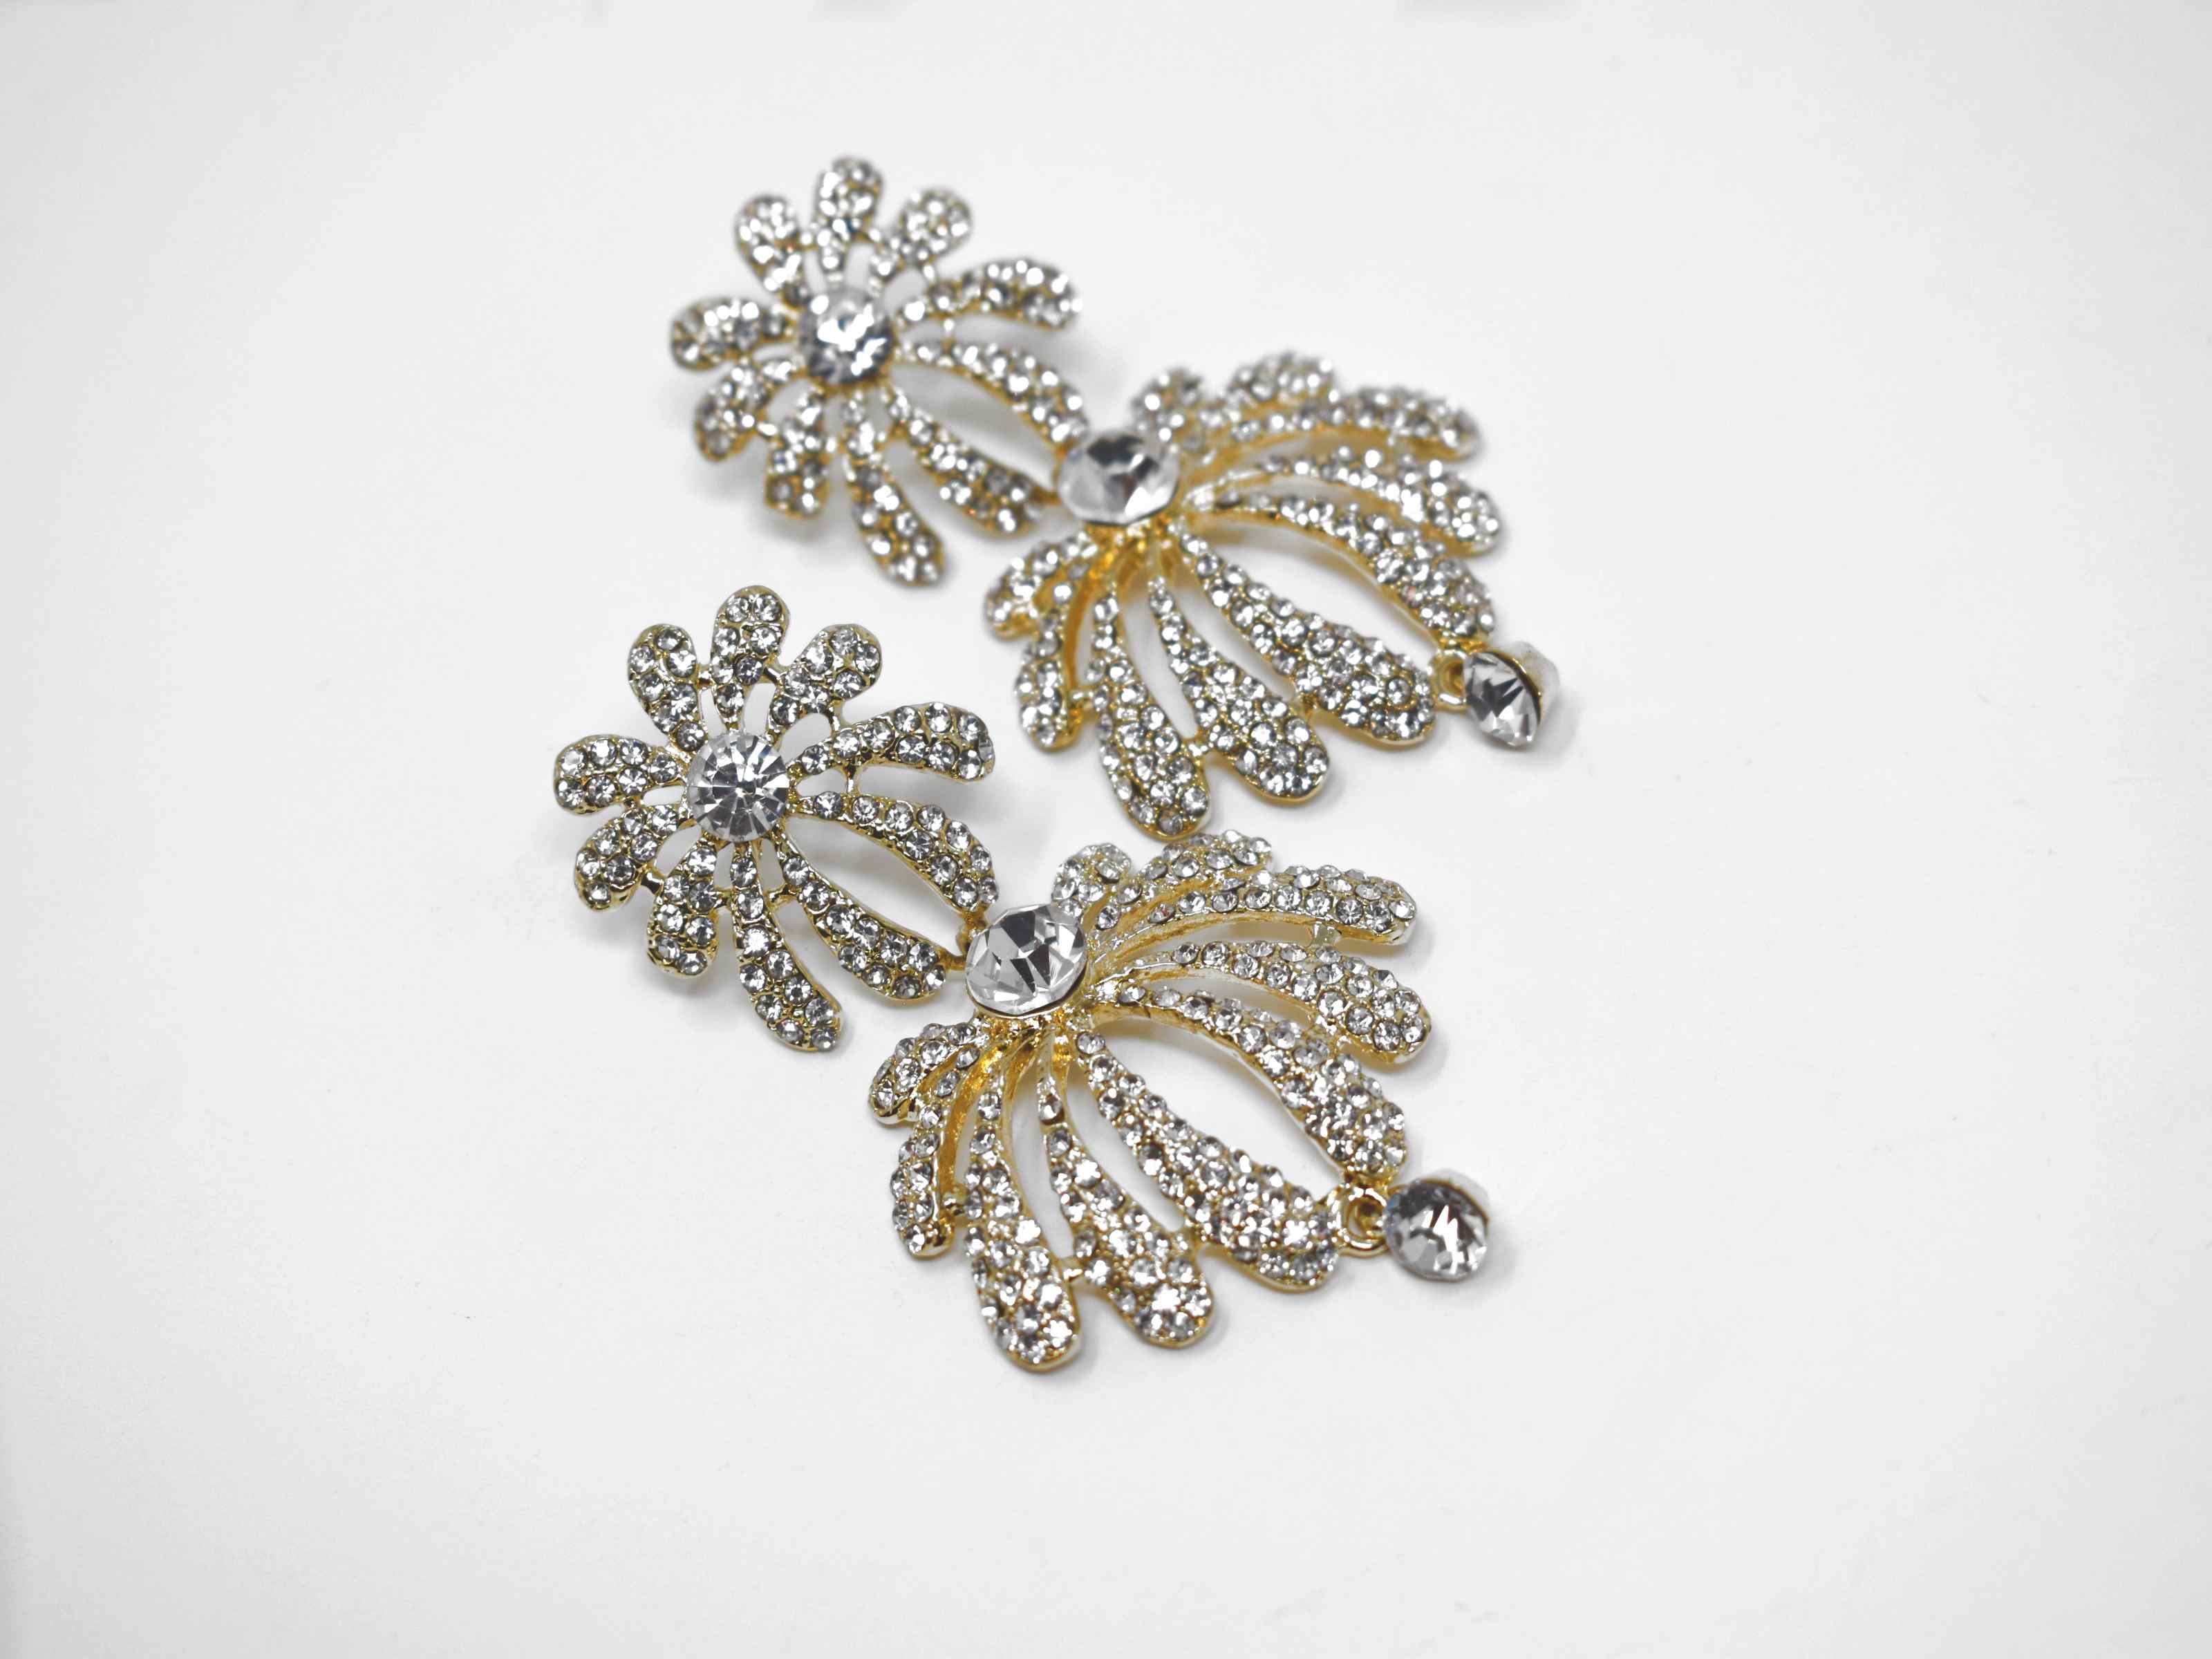 A radiant burst of sparkle is how you would describe our helenium gold earrings. These are a two tier floral burst formal drop earring with clear stones. They are 2 1/2 inches in length with a pushback clasp.